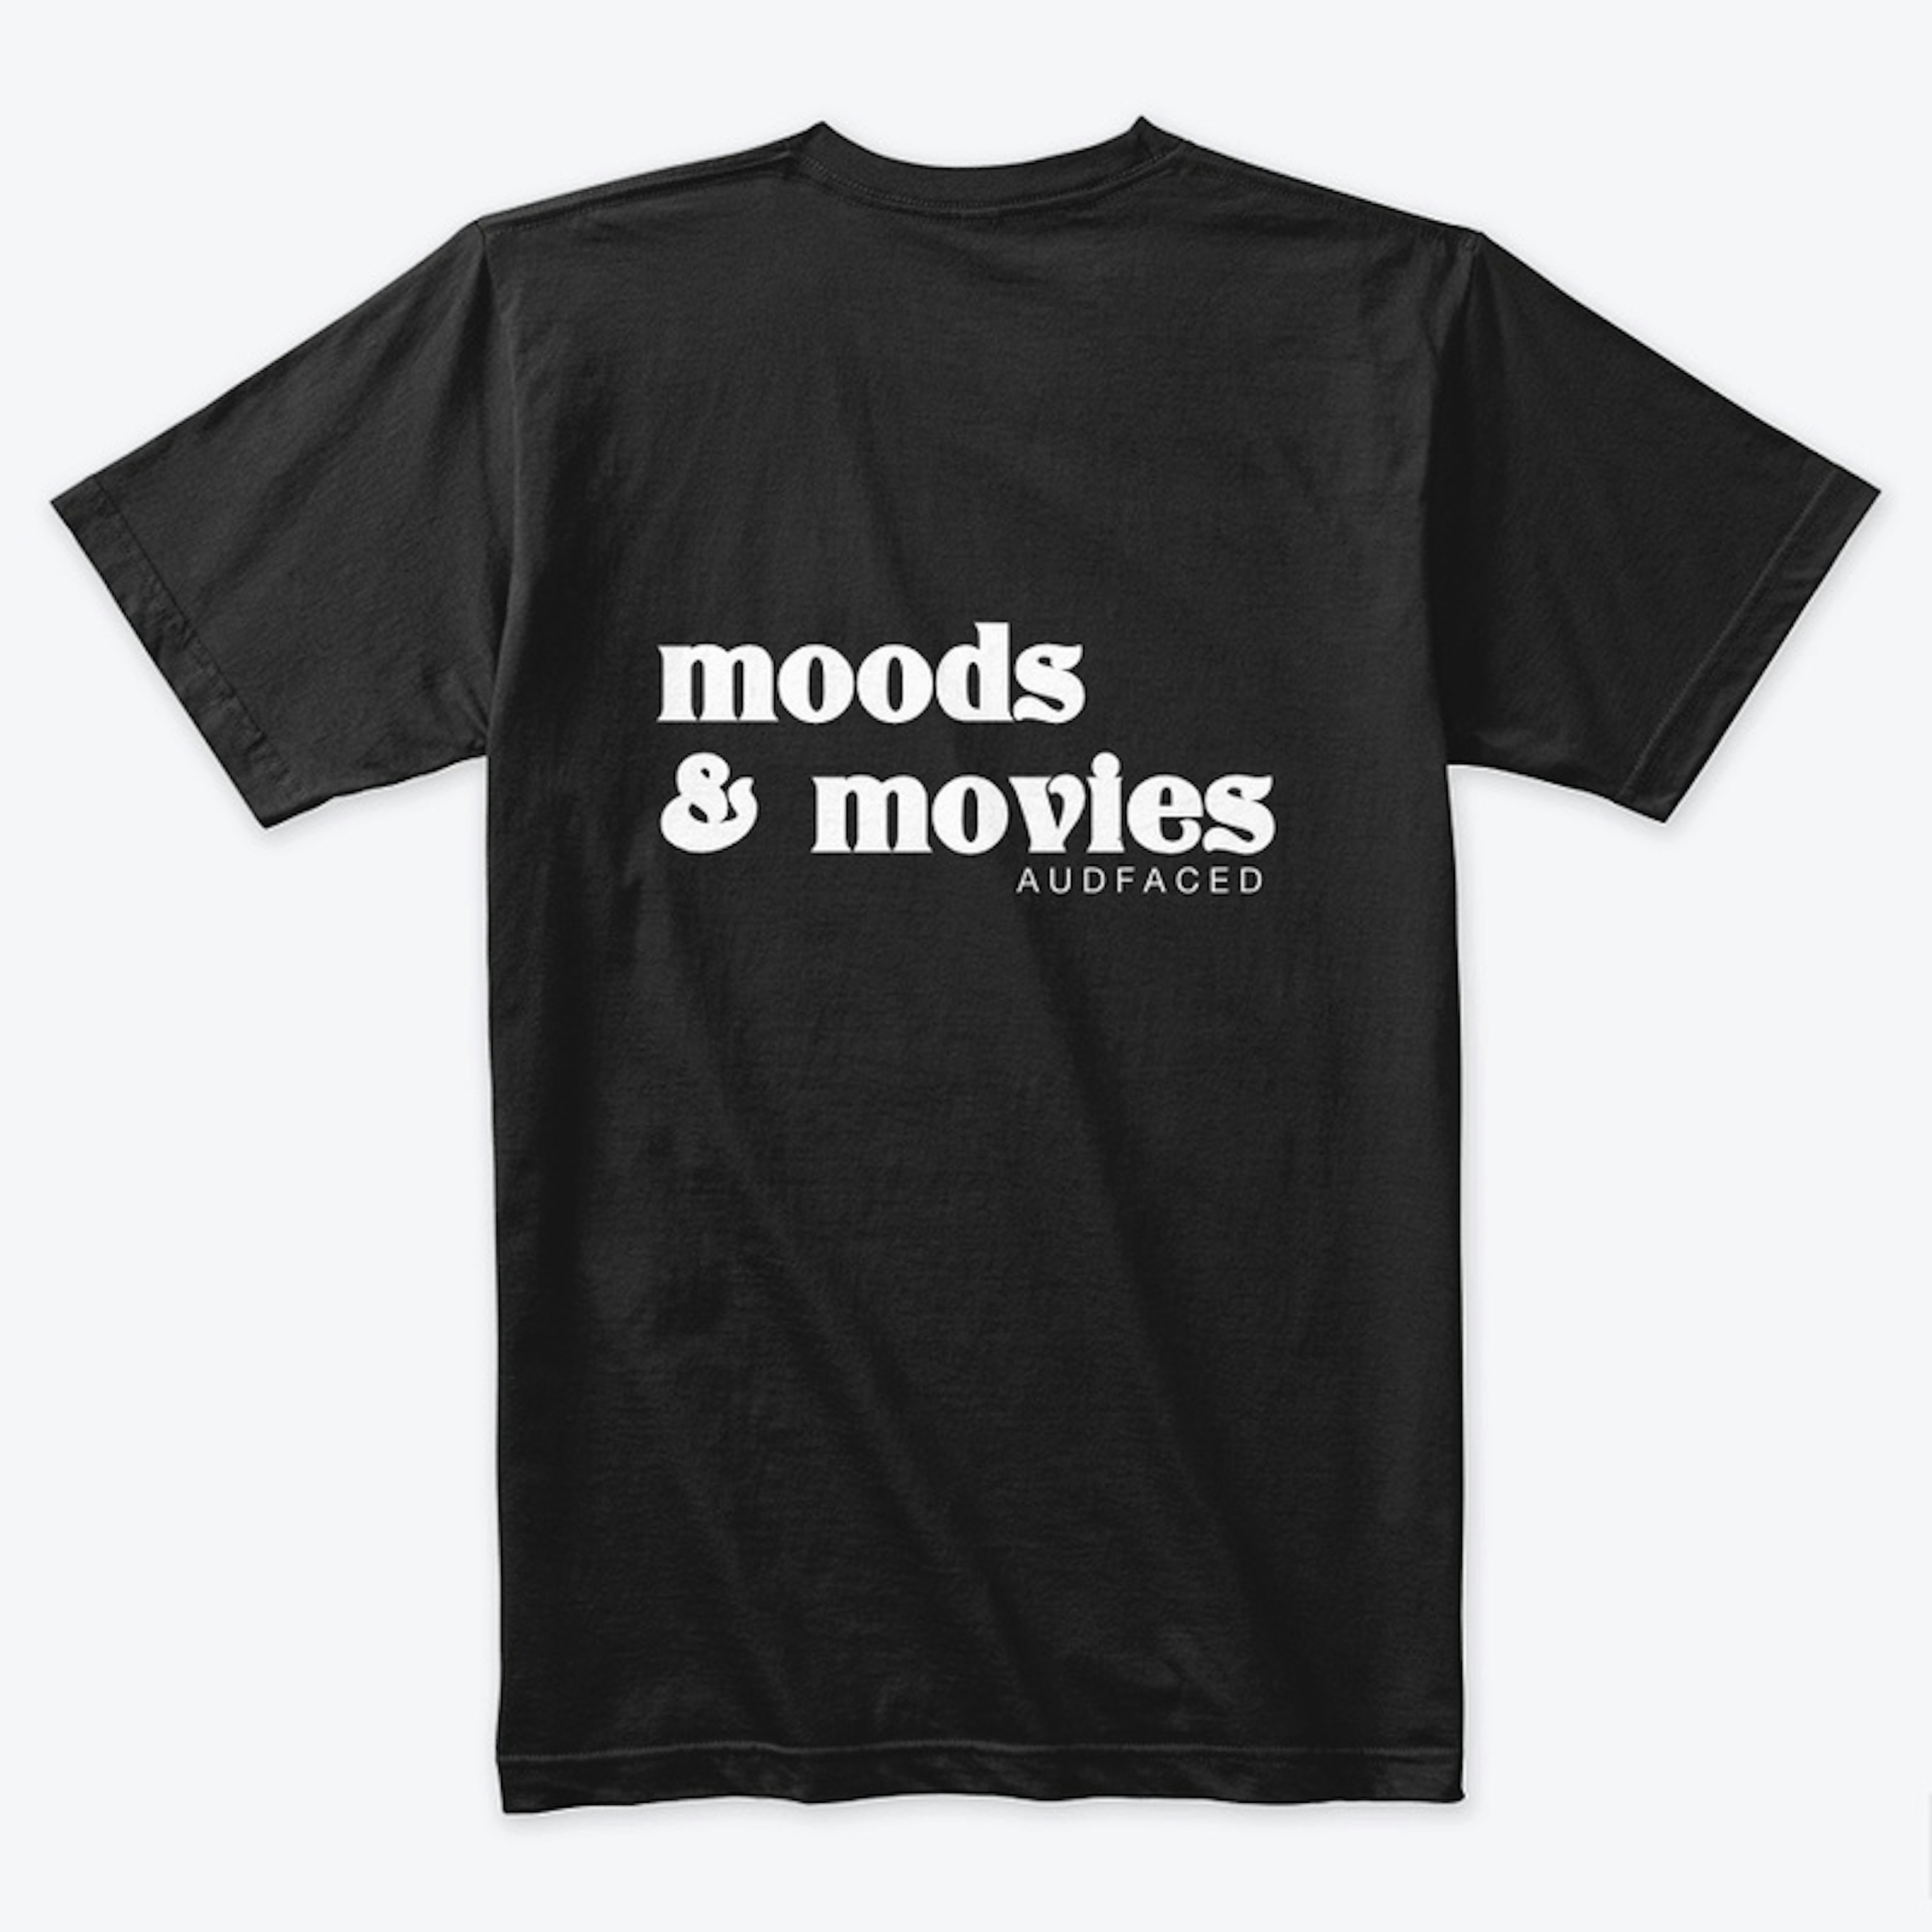 Moody - AUDFACED Apparel